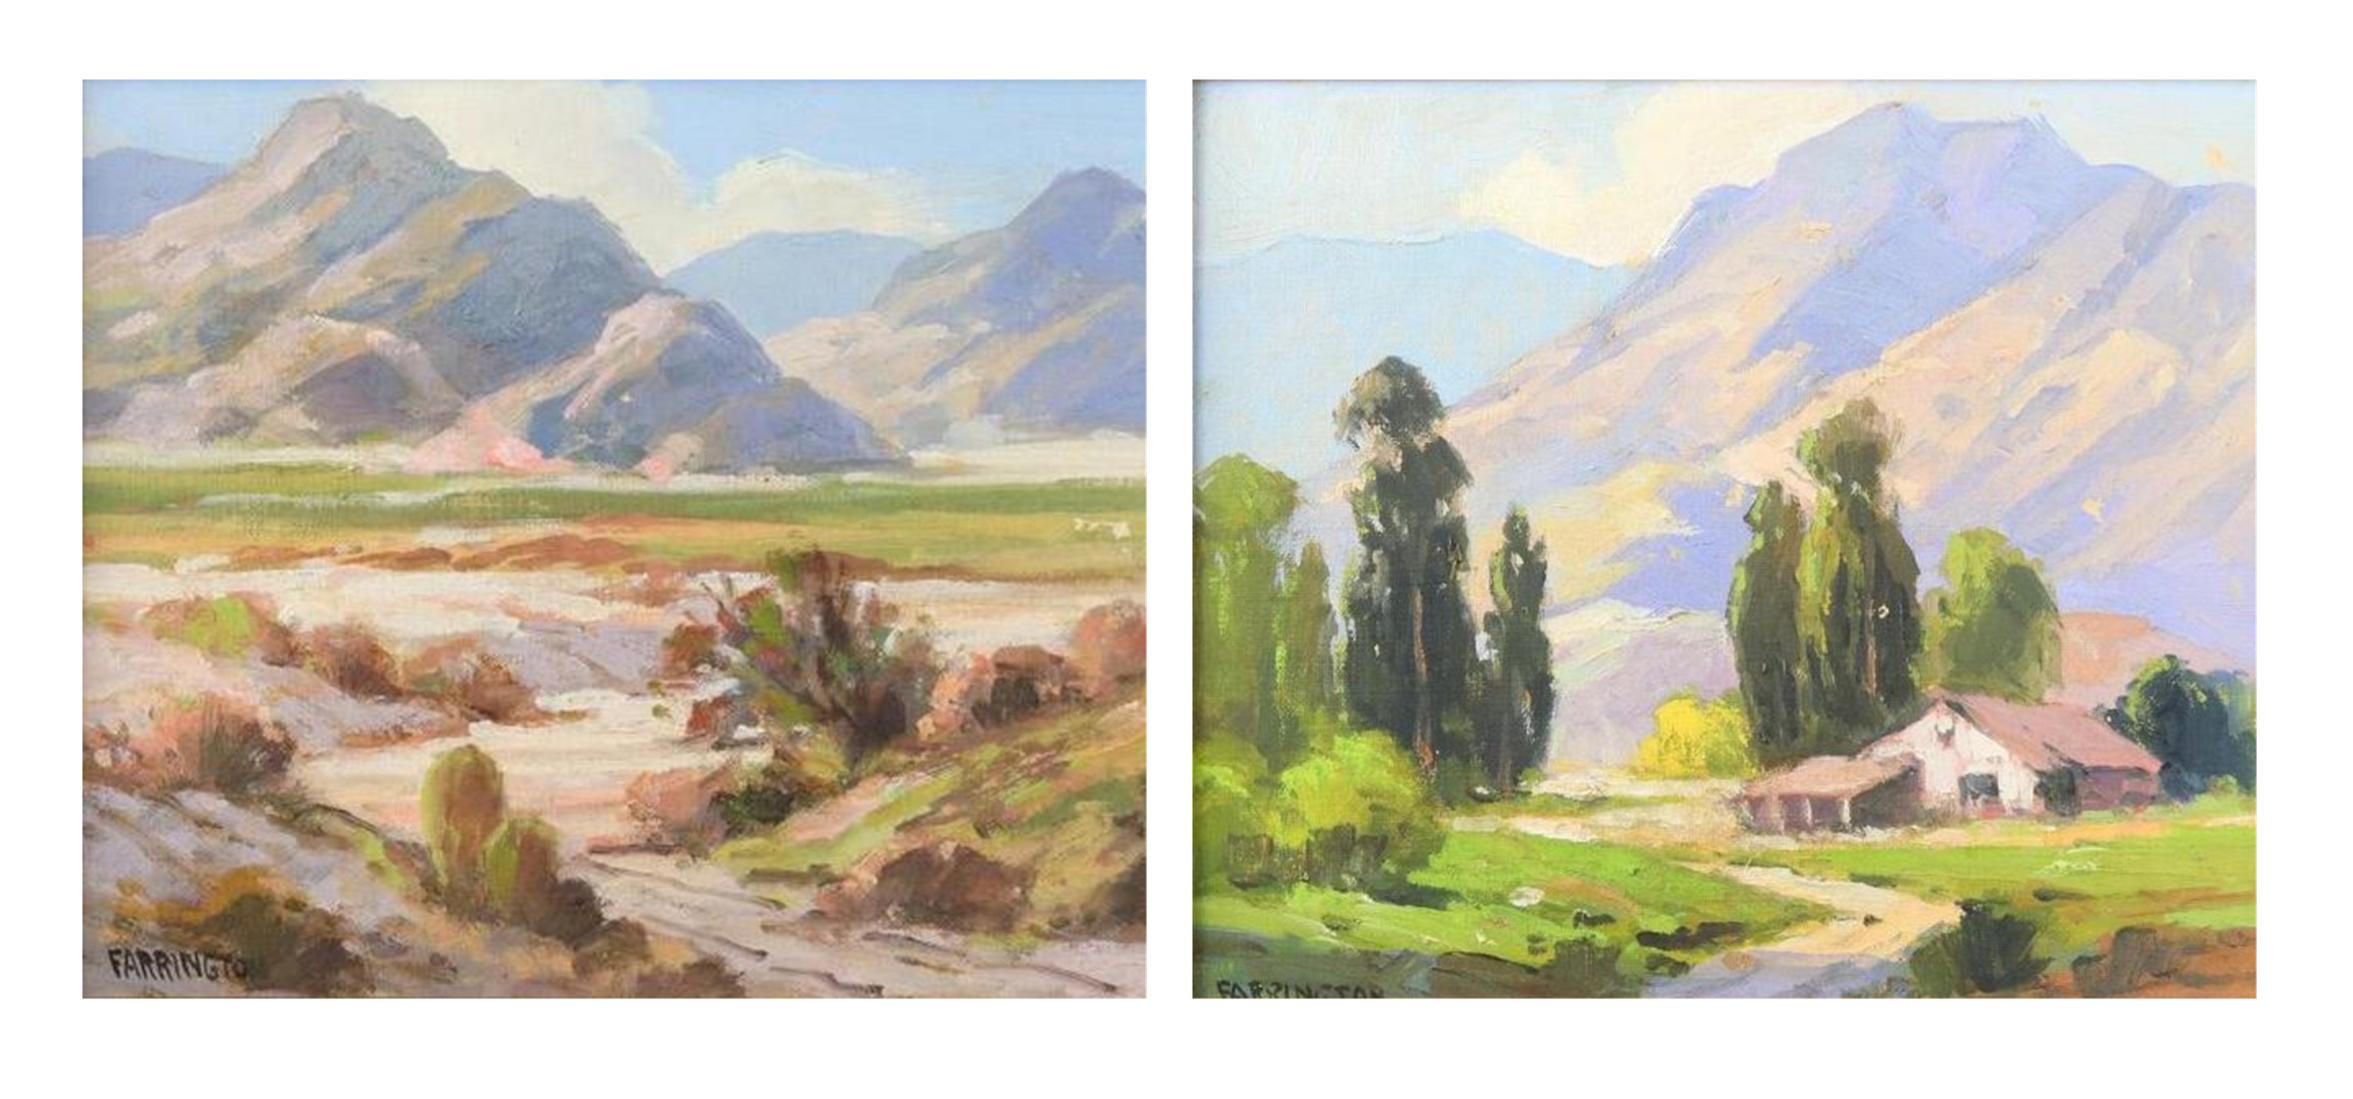 Walter Farrington Moses desert landscape paintings, 'Sunland' and 'Indian Wells'